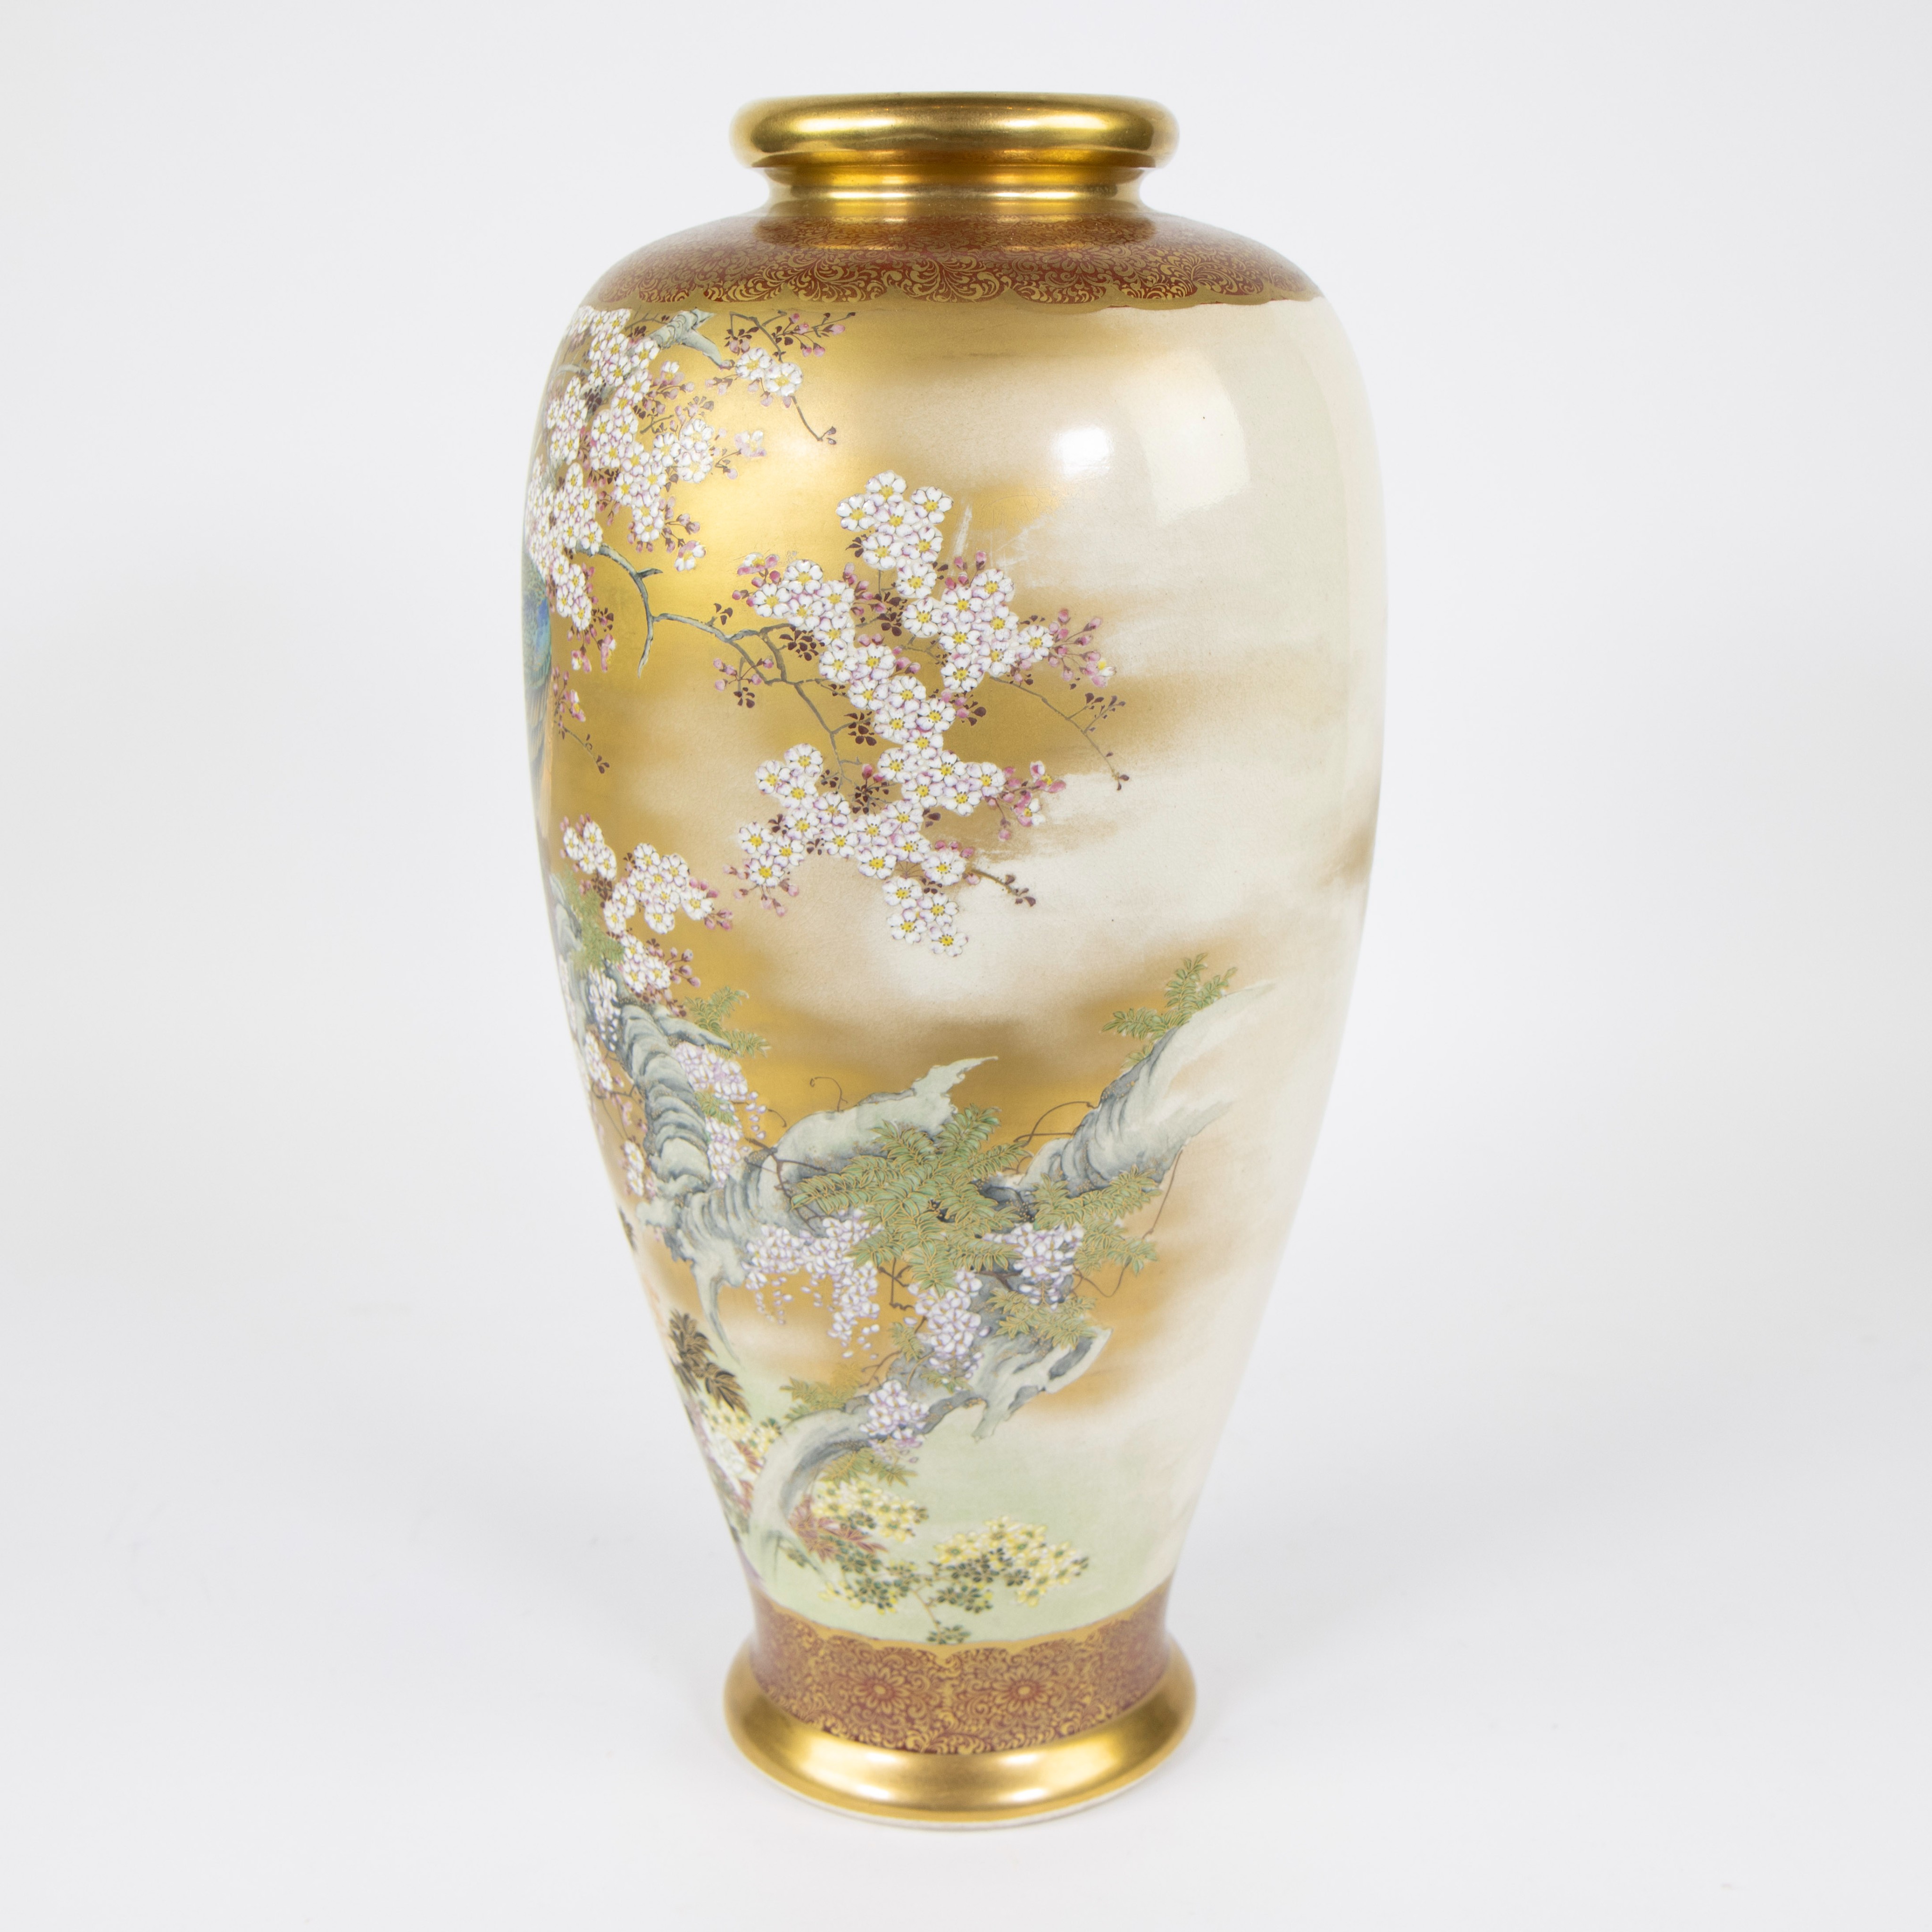 Porcelain vase, fine, hand-painted decor of peacocks and flowers on a gold background, signed - Image 2 of 5